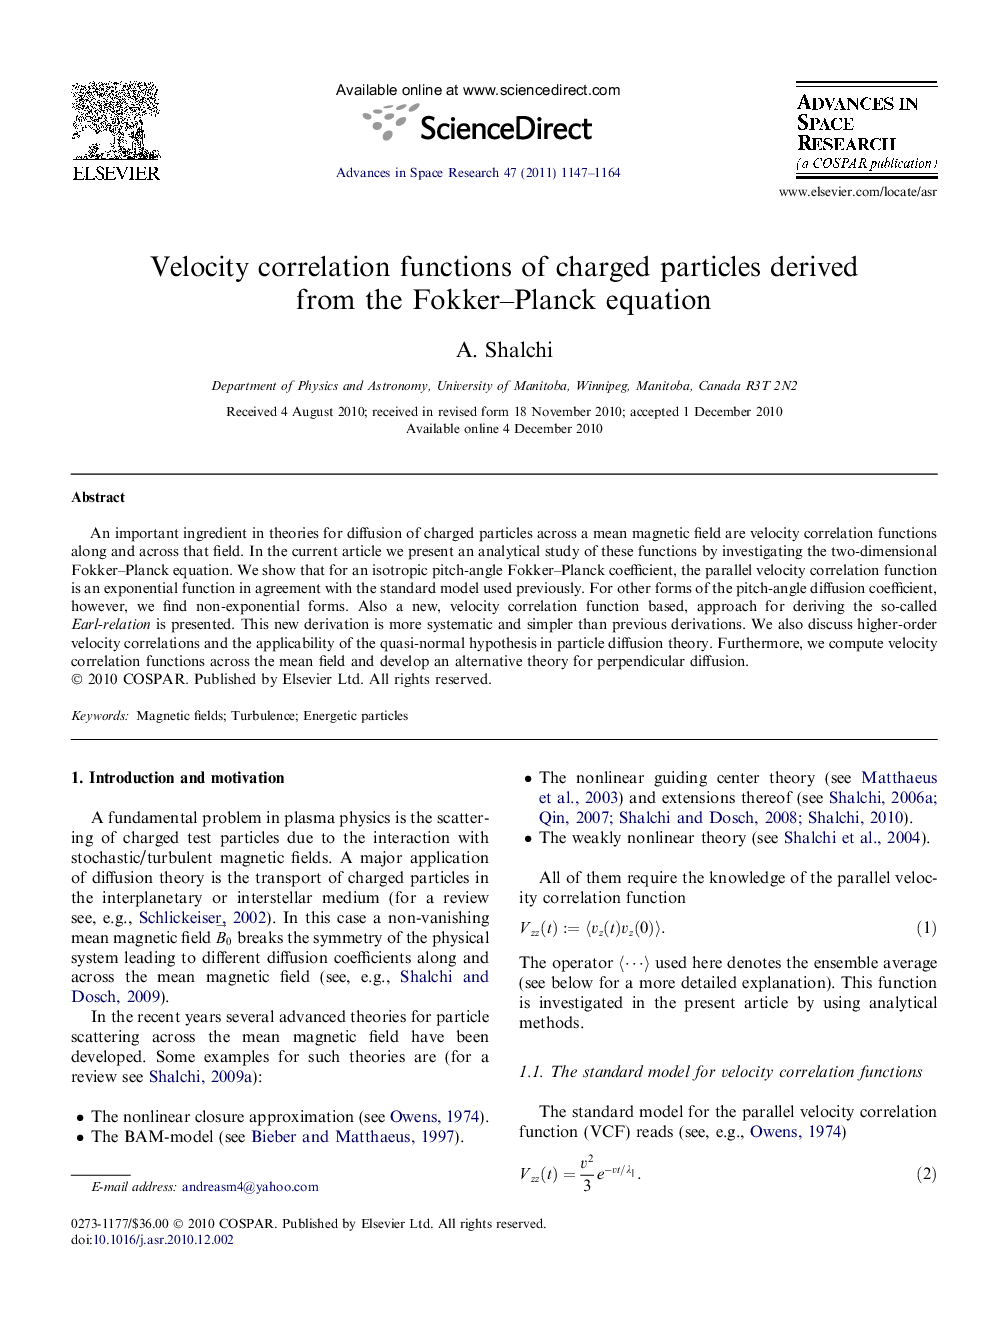 Velocity correlation functions of charged particles derived from the Fokker-Planck equation